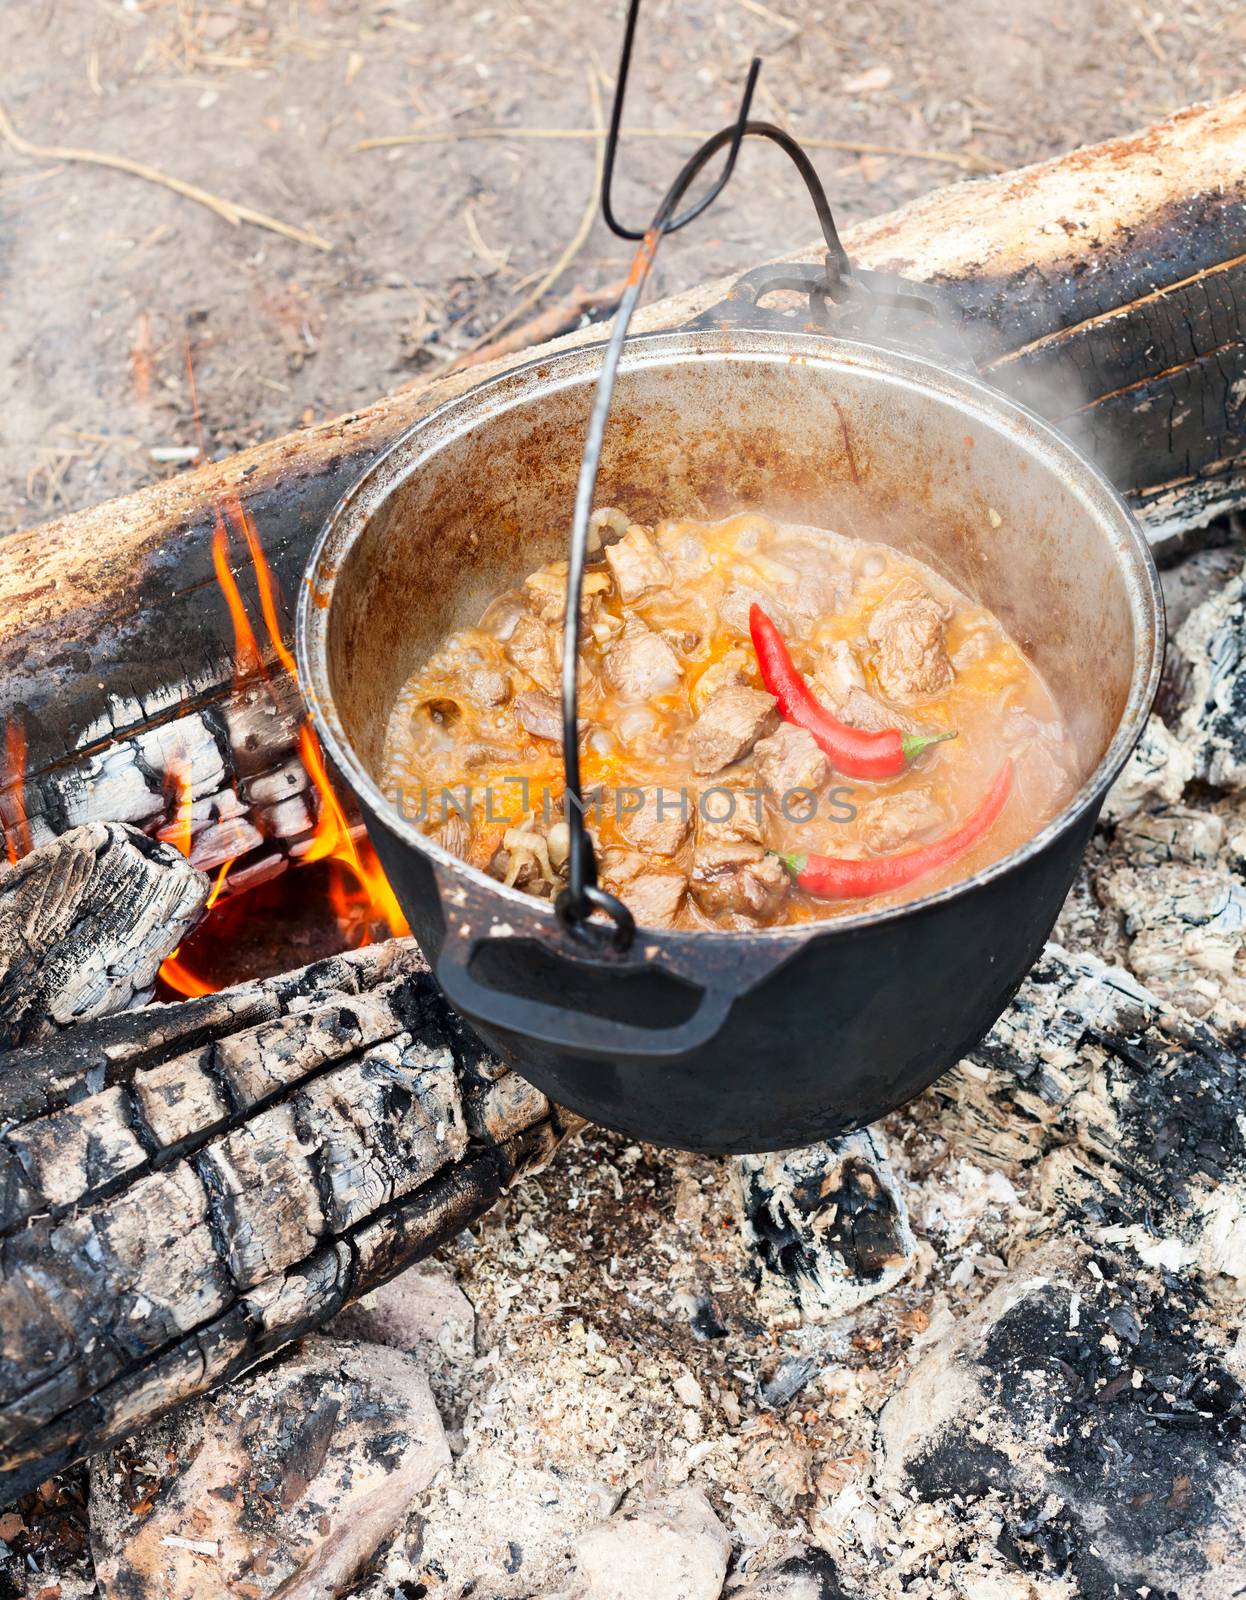 Cooking Goulash on open fire by naumoid